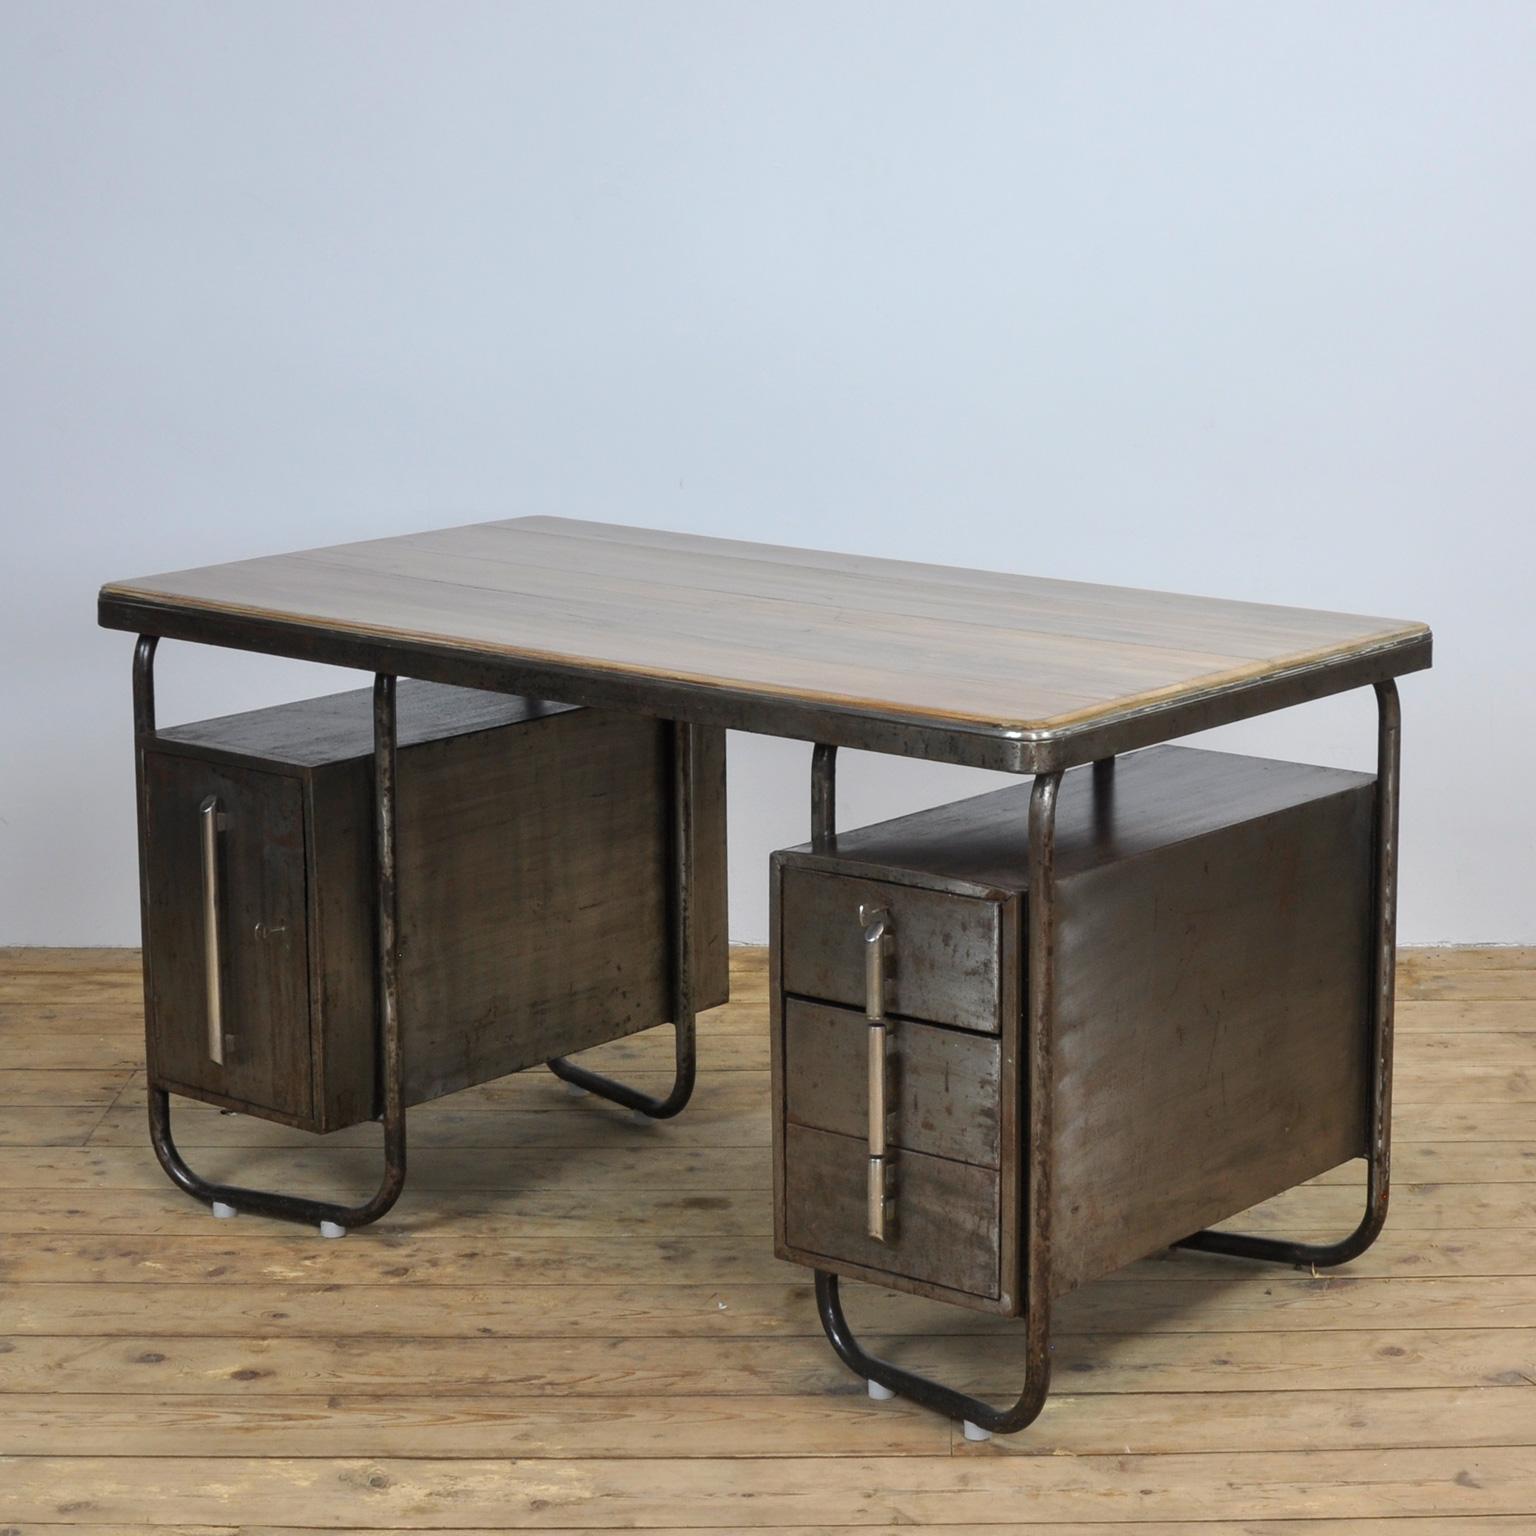 Beautiful Bauhaus desk, produced in the 1930s. Nice detail, the vertical chrome handles. Made from iron with an oak top.
   